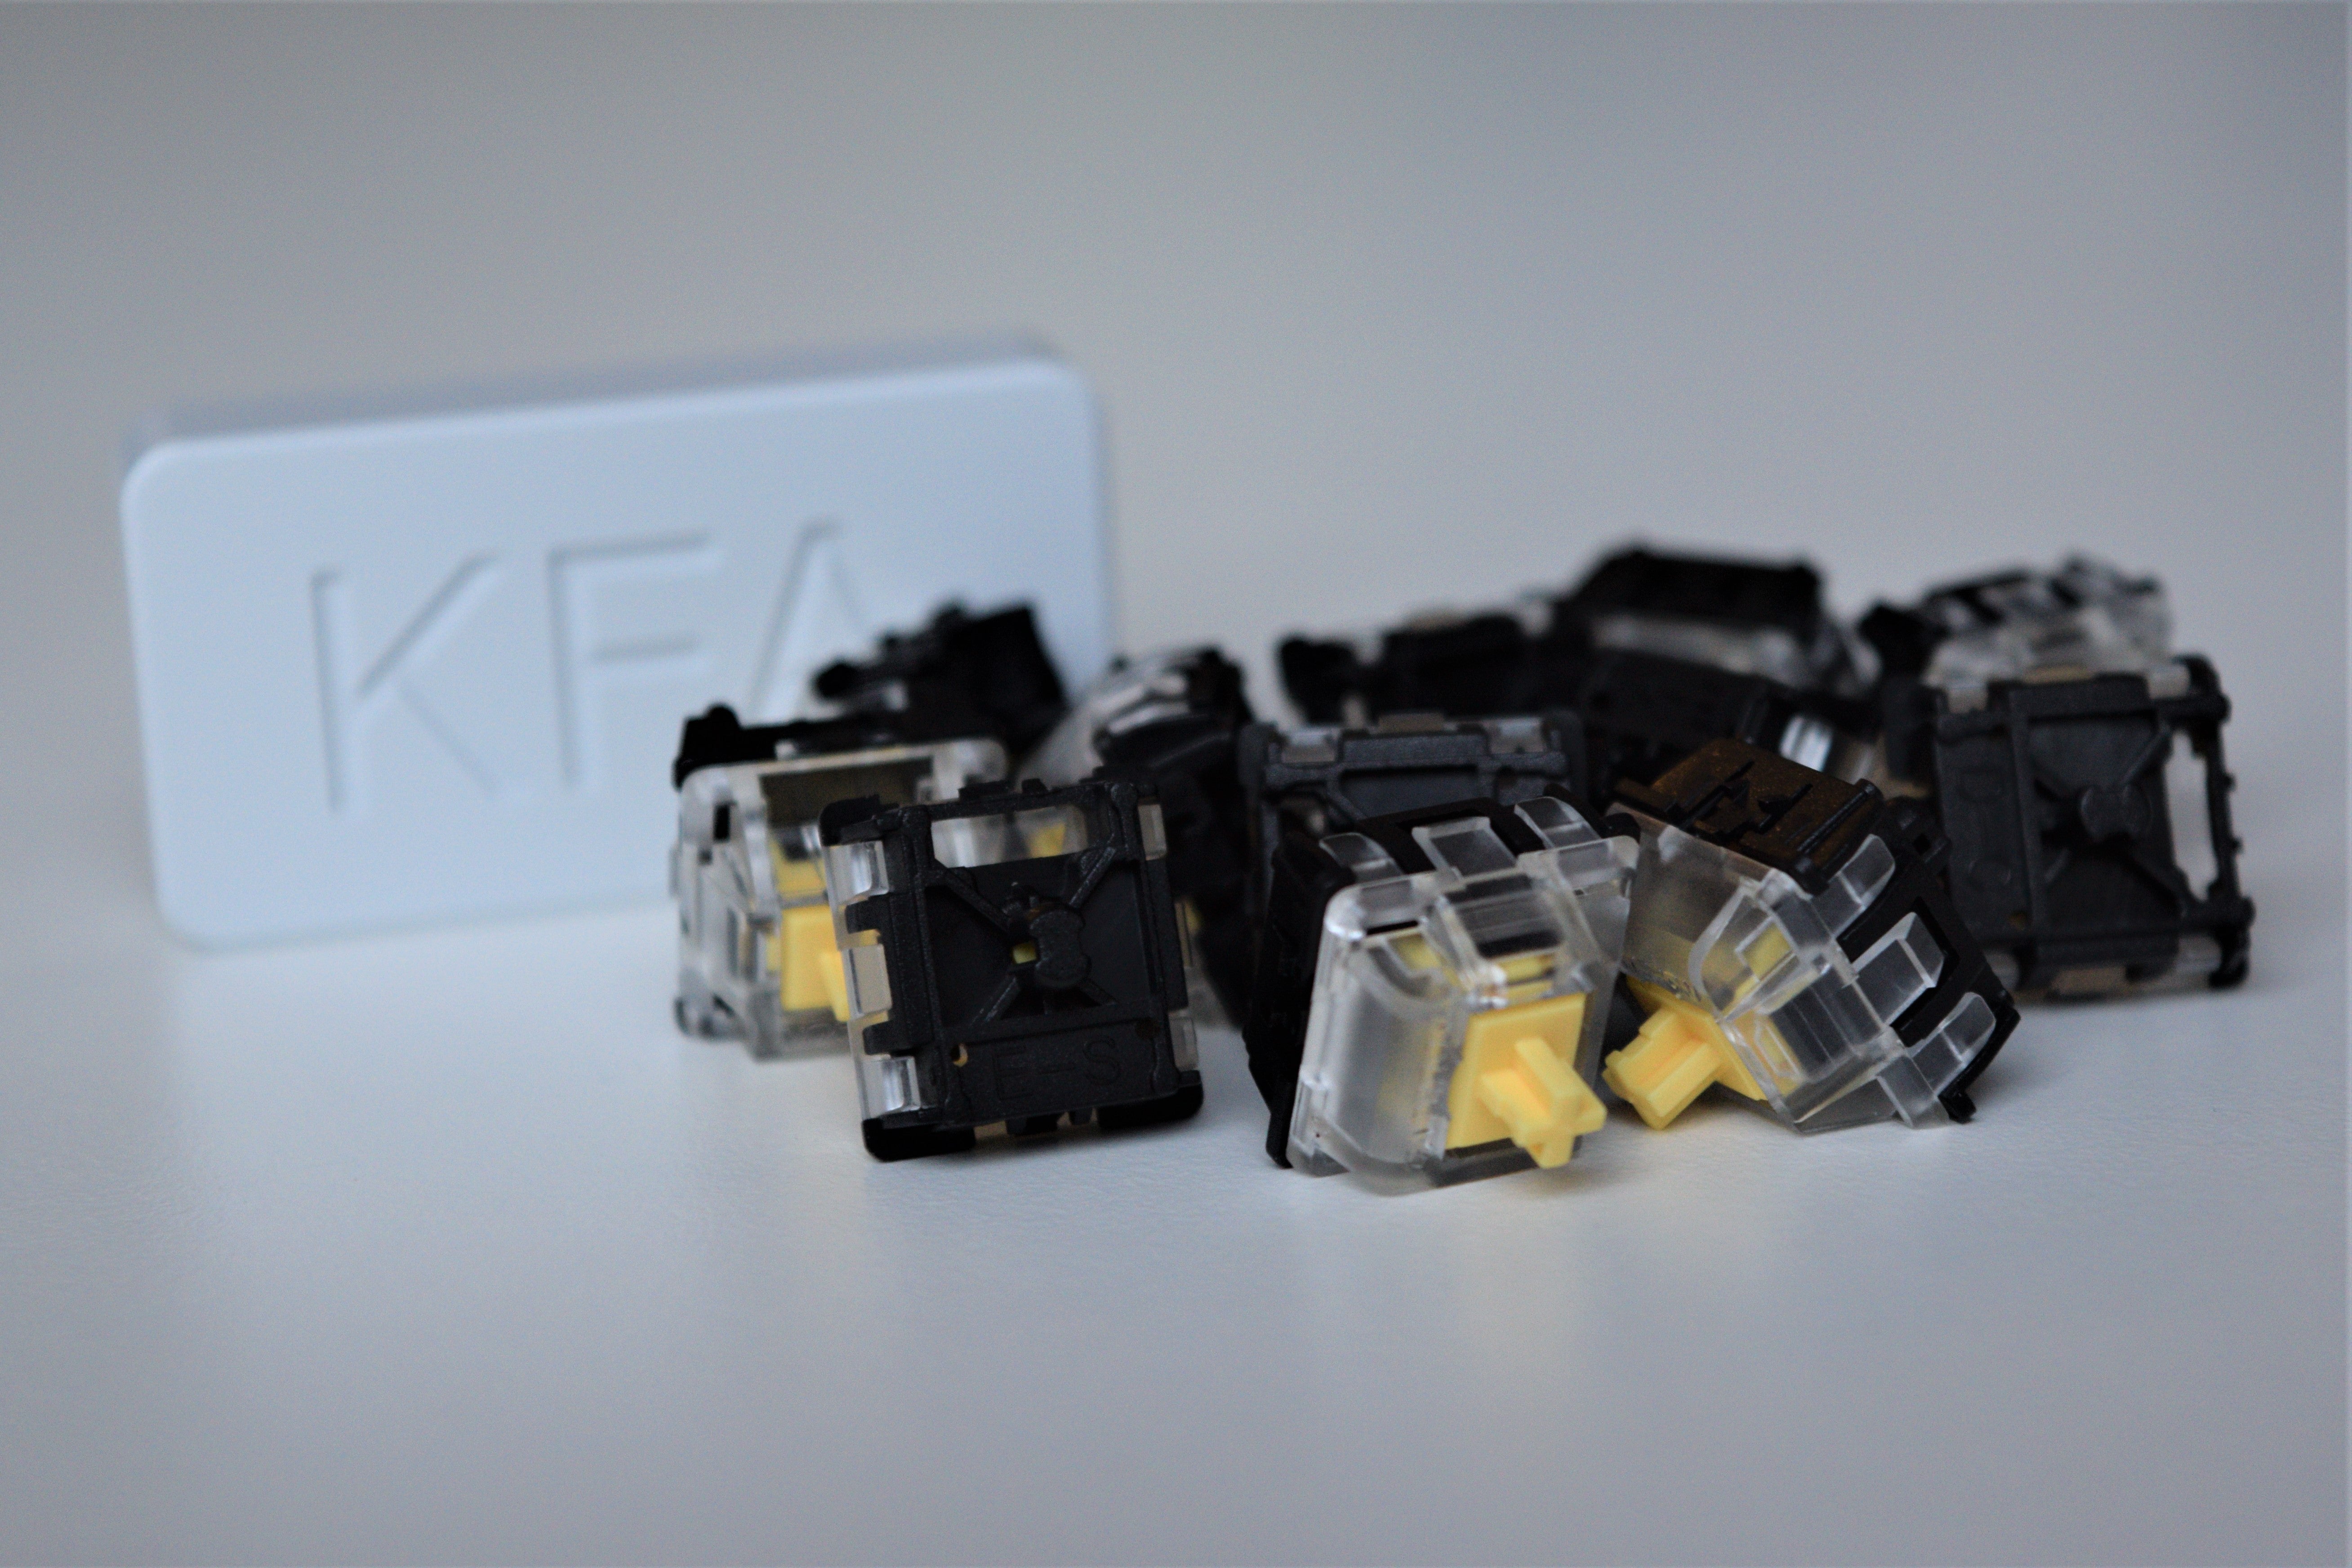 Gateron Optical Yellow Group View with KFA branding out of focus